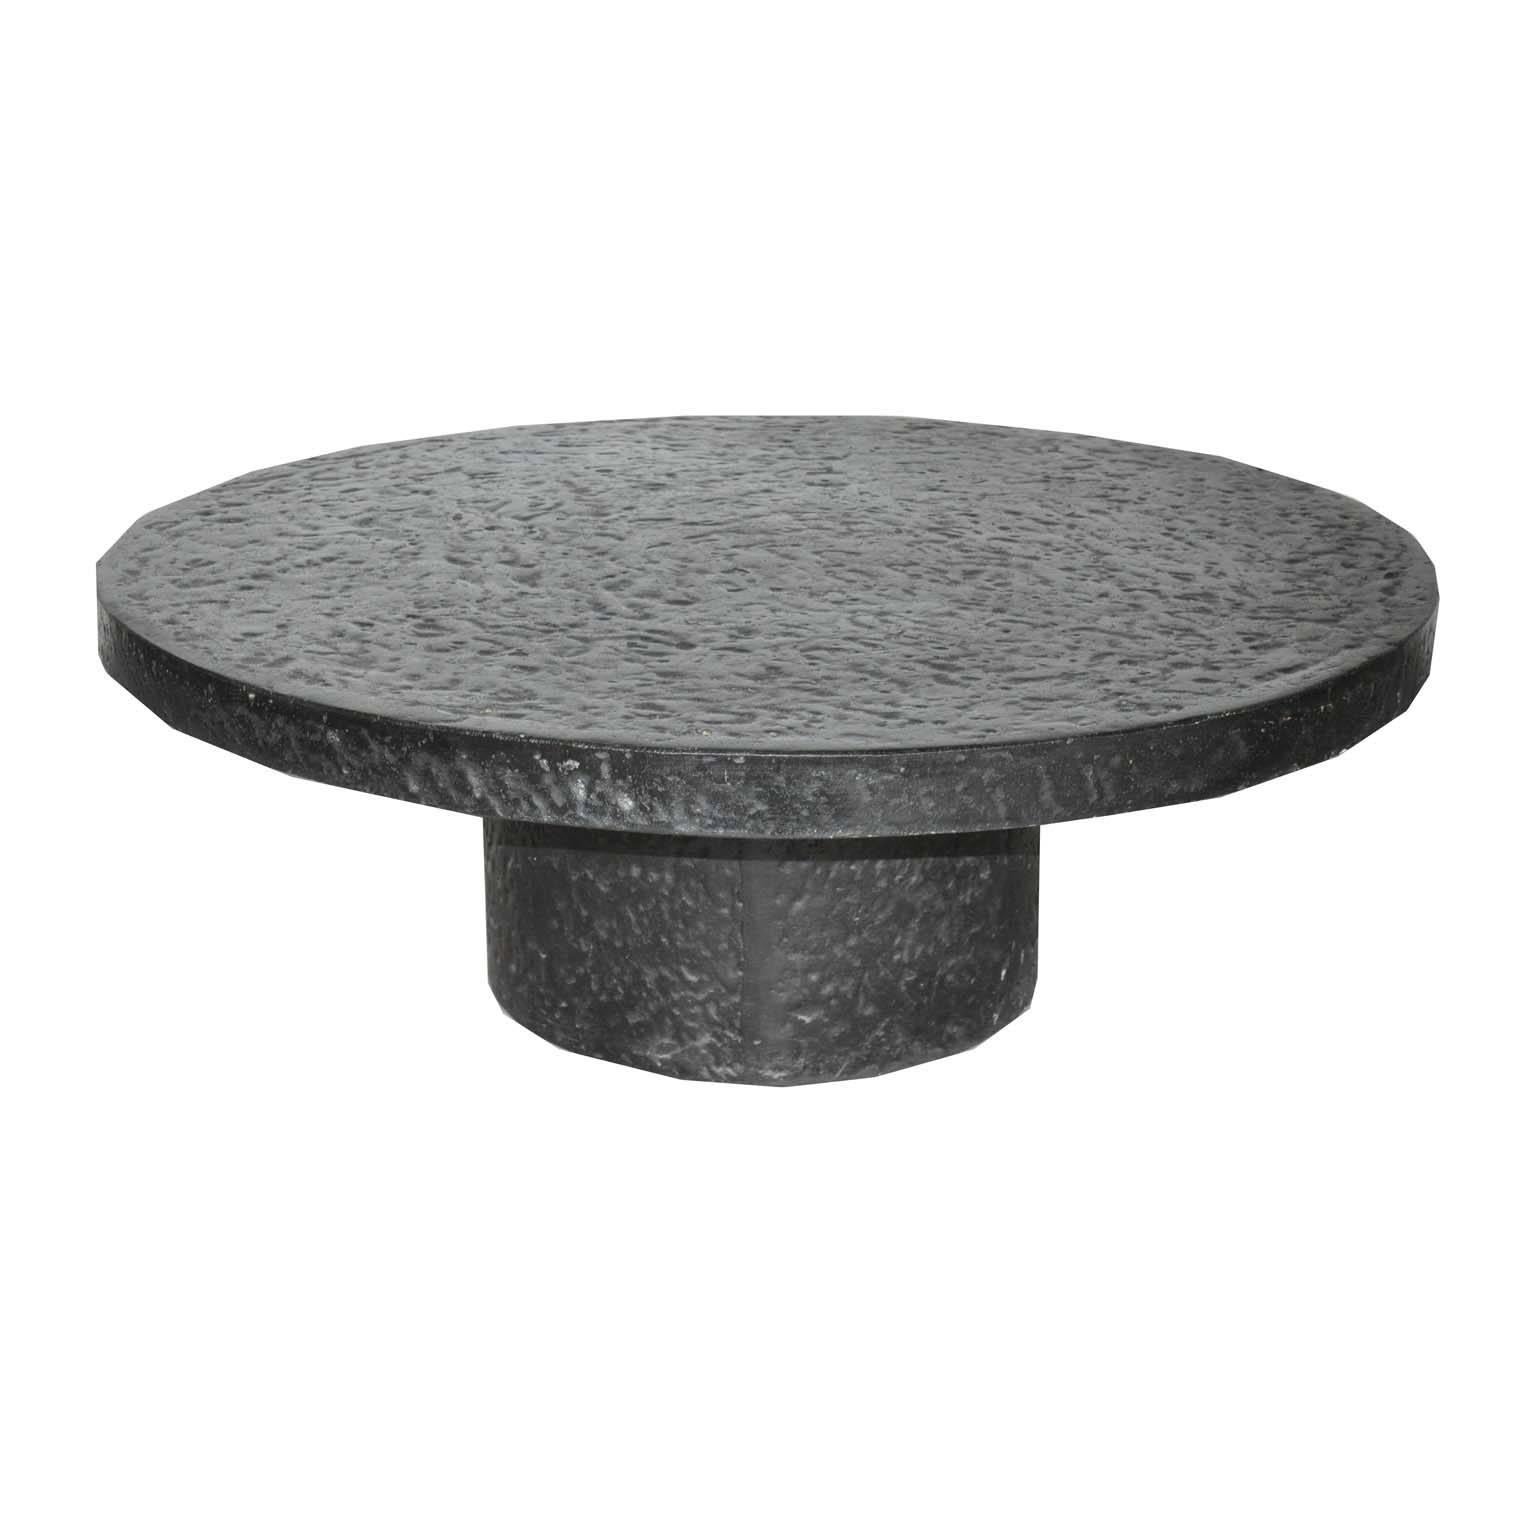 Black Brutalist coffee table in the style of Ado Chale. Made in the 1970s, France.

The table has an interesting structure. It is made of molded graphite stone and resin. This unique process, gives it its beautiful rough, brutalist